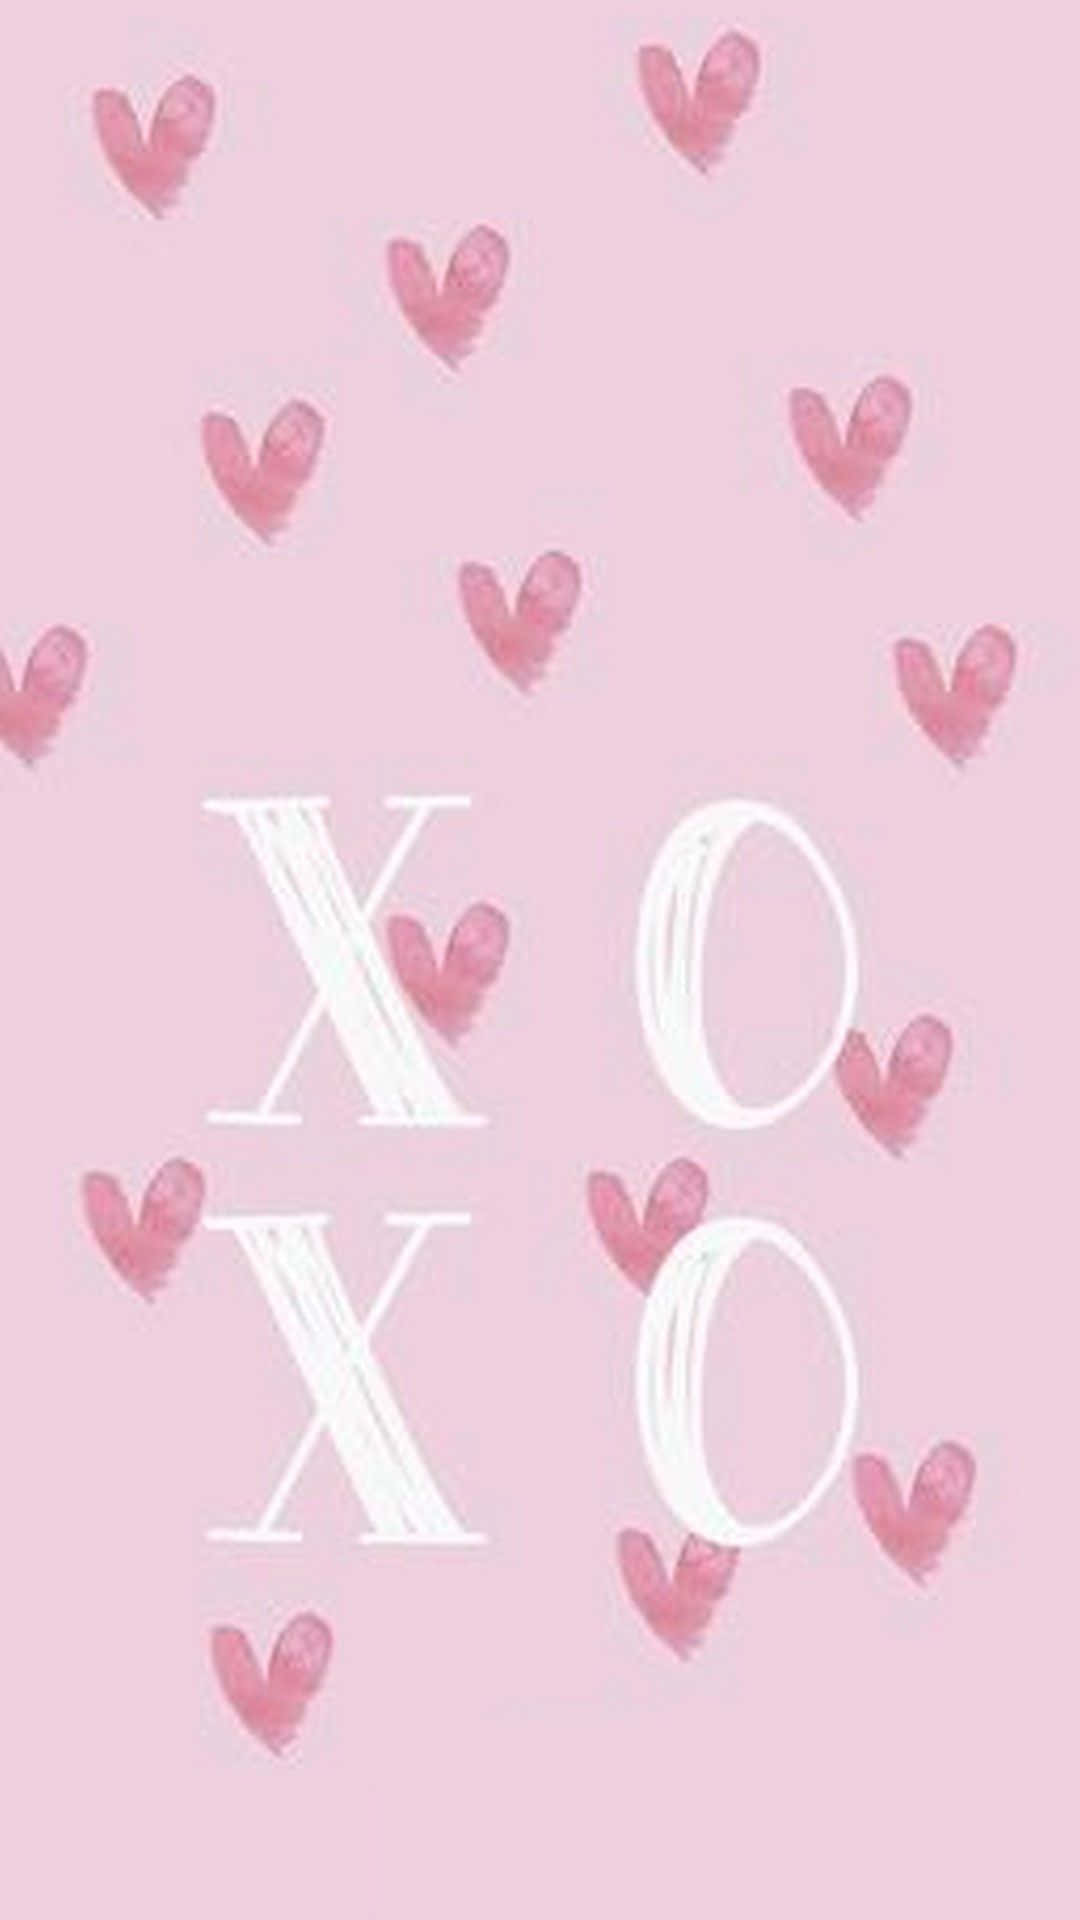 A Pink Background With Hearts And The Word Xoxo Wallpaper